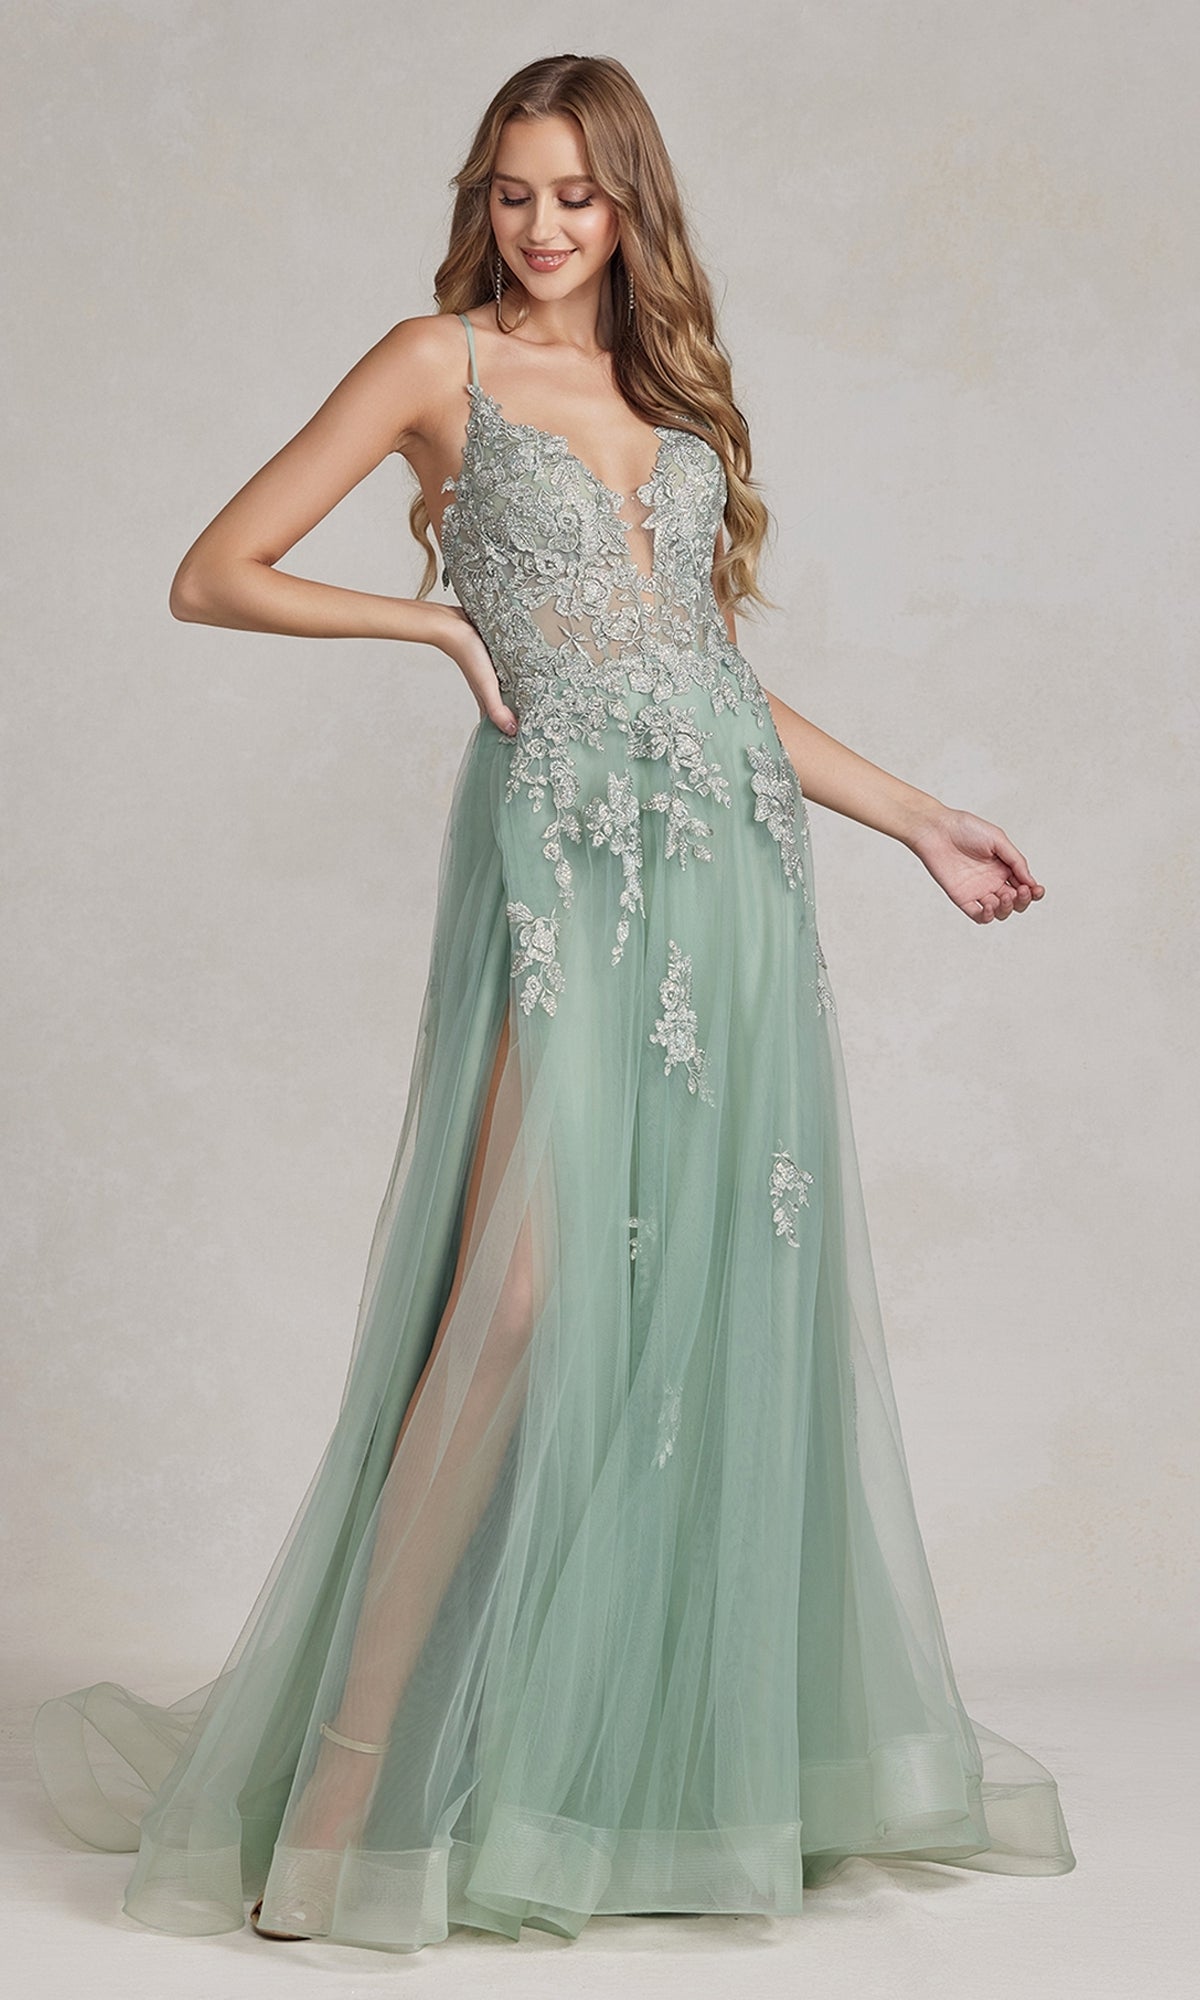 Sage Long A-Line Lace Prom Dress with Wrap-Style Skirt